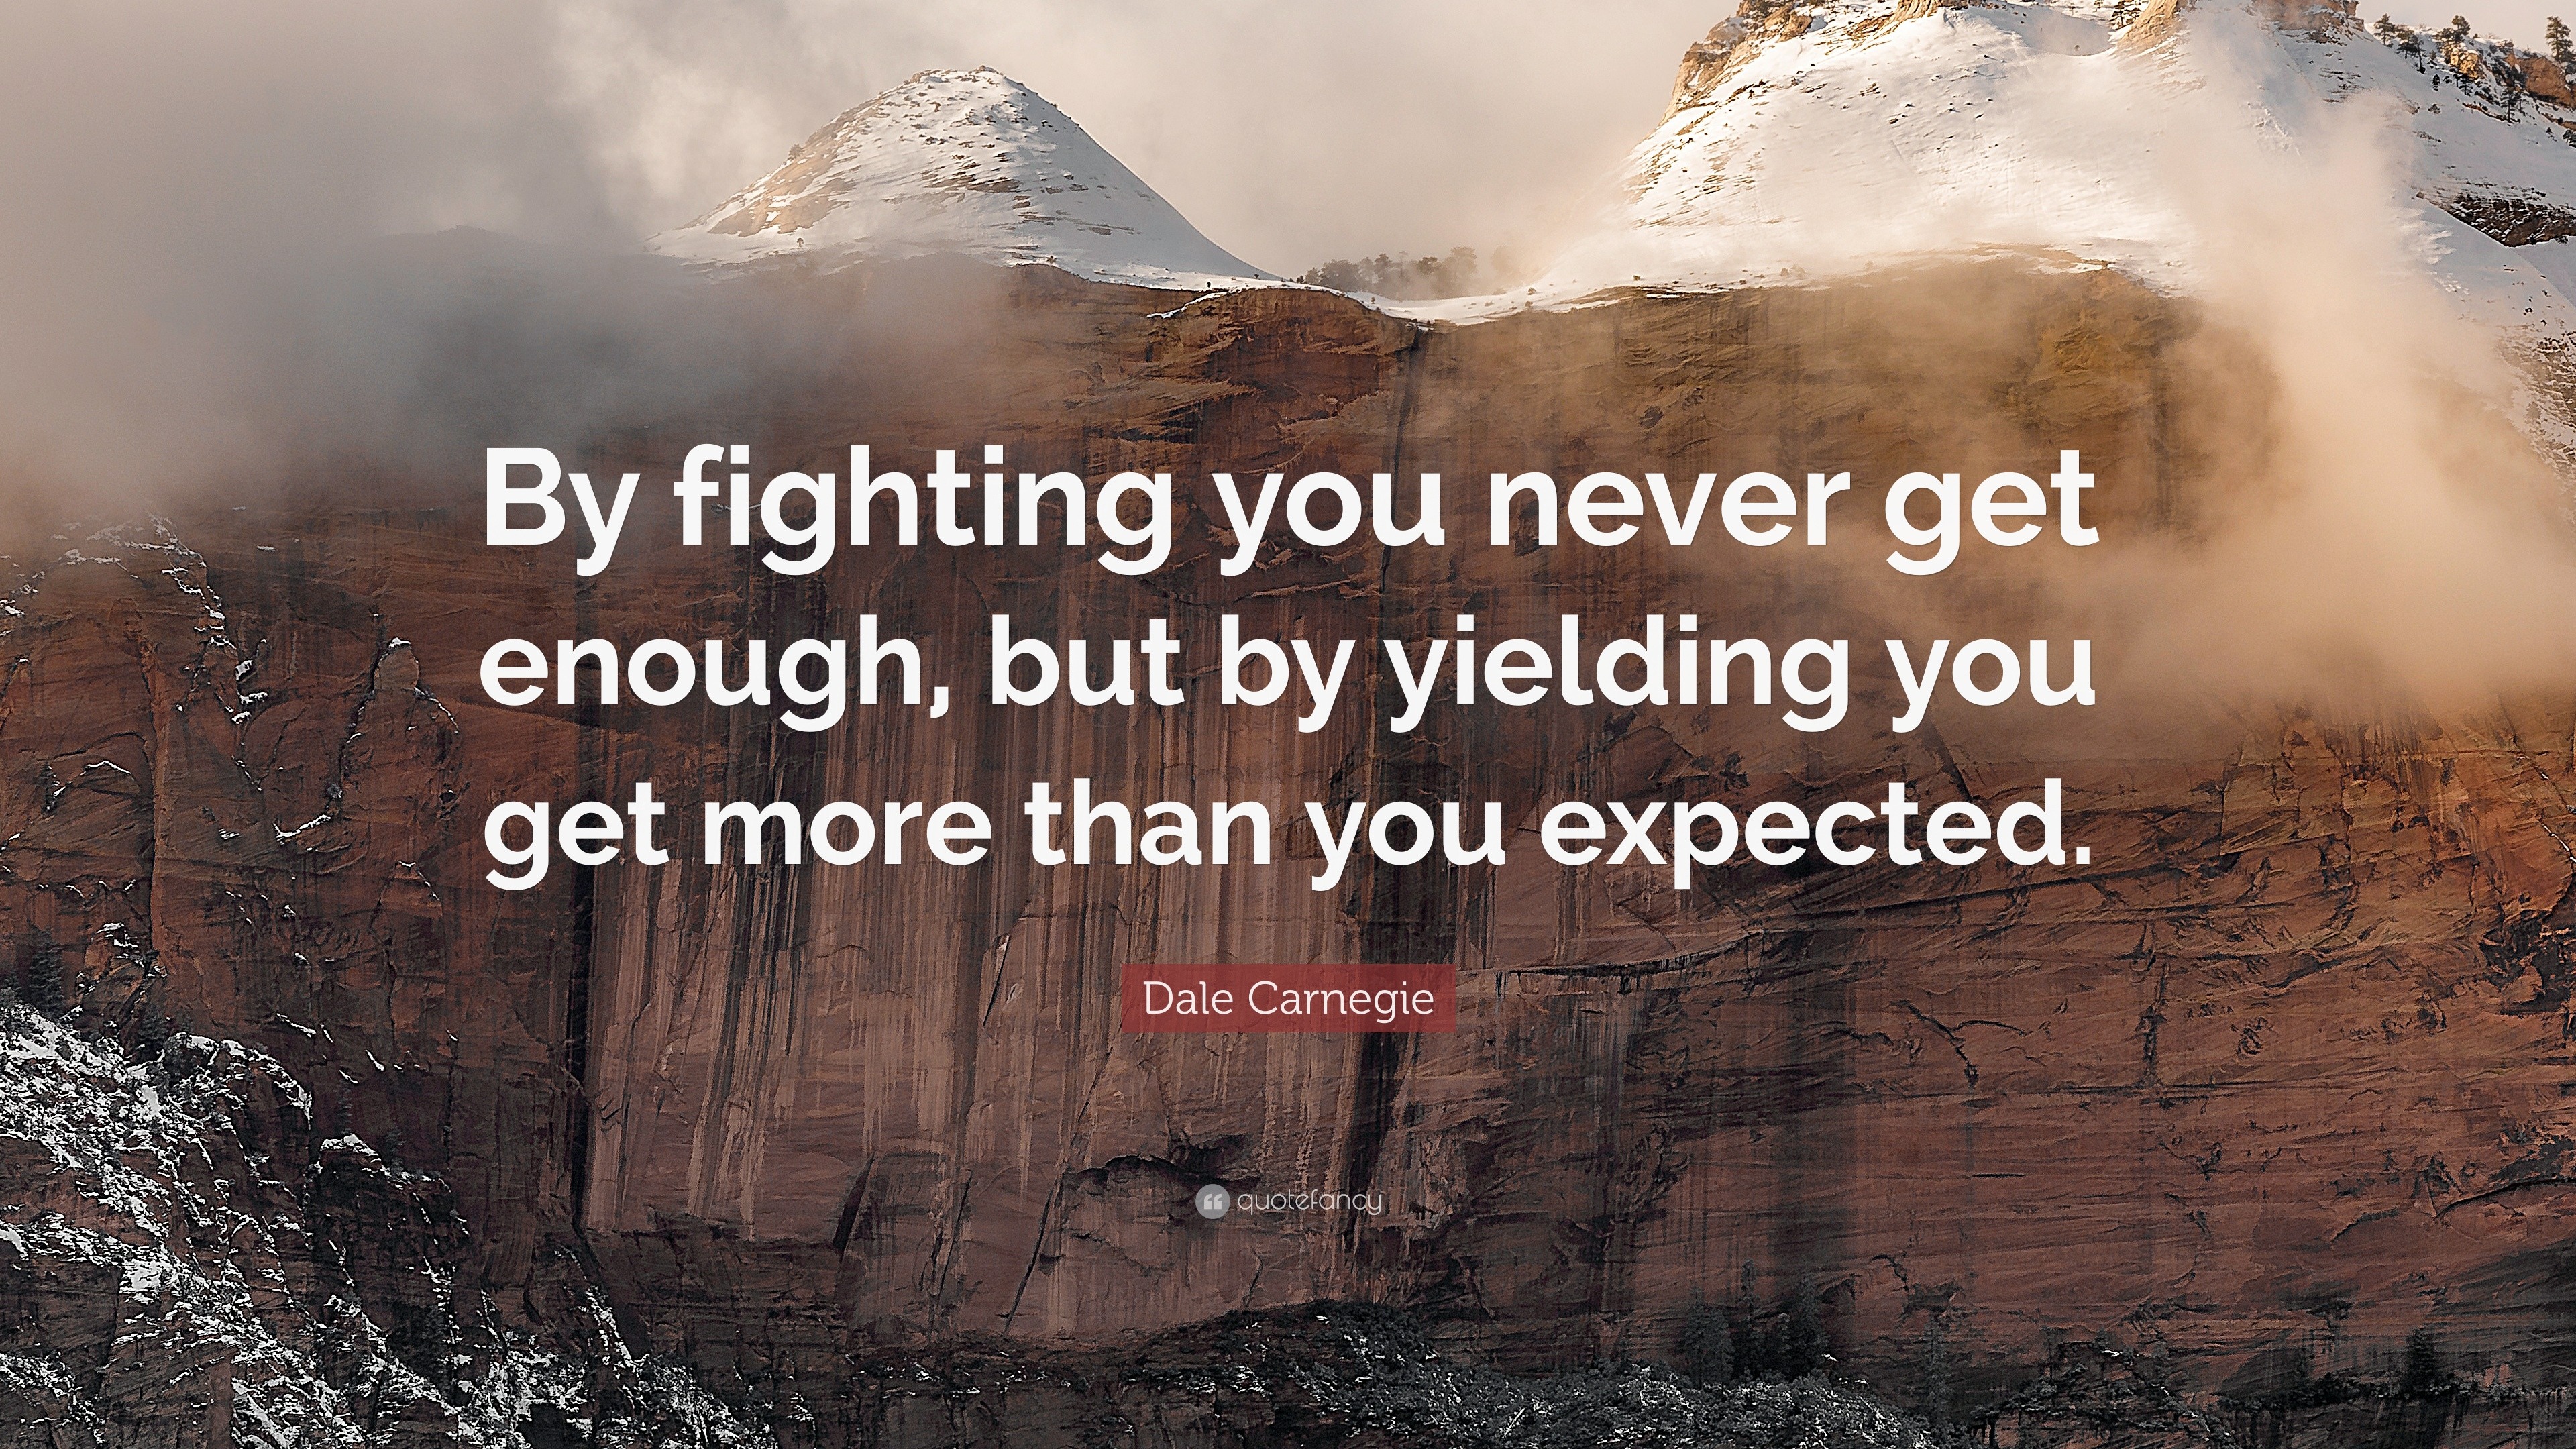 Dale Carnegie Quote: “By fighting you never get enough, but by yielding ...